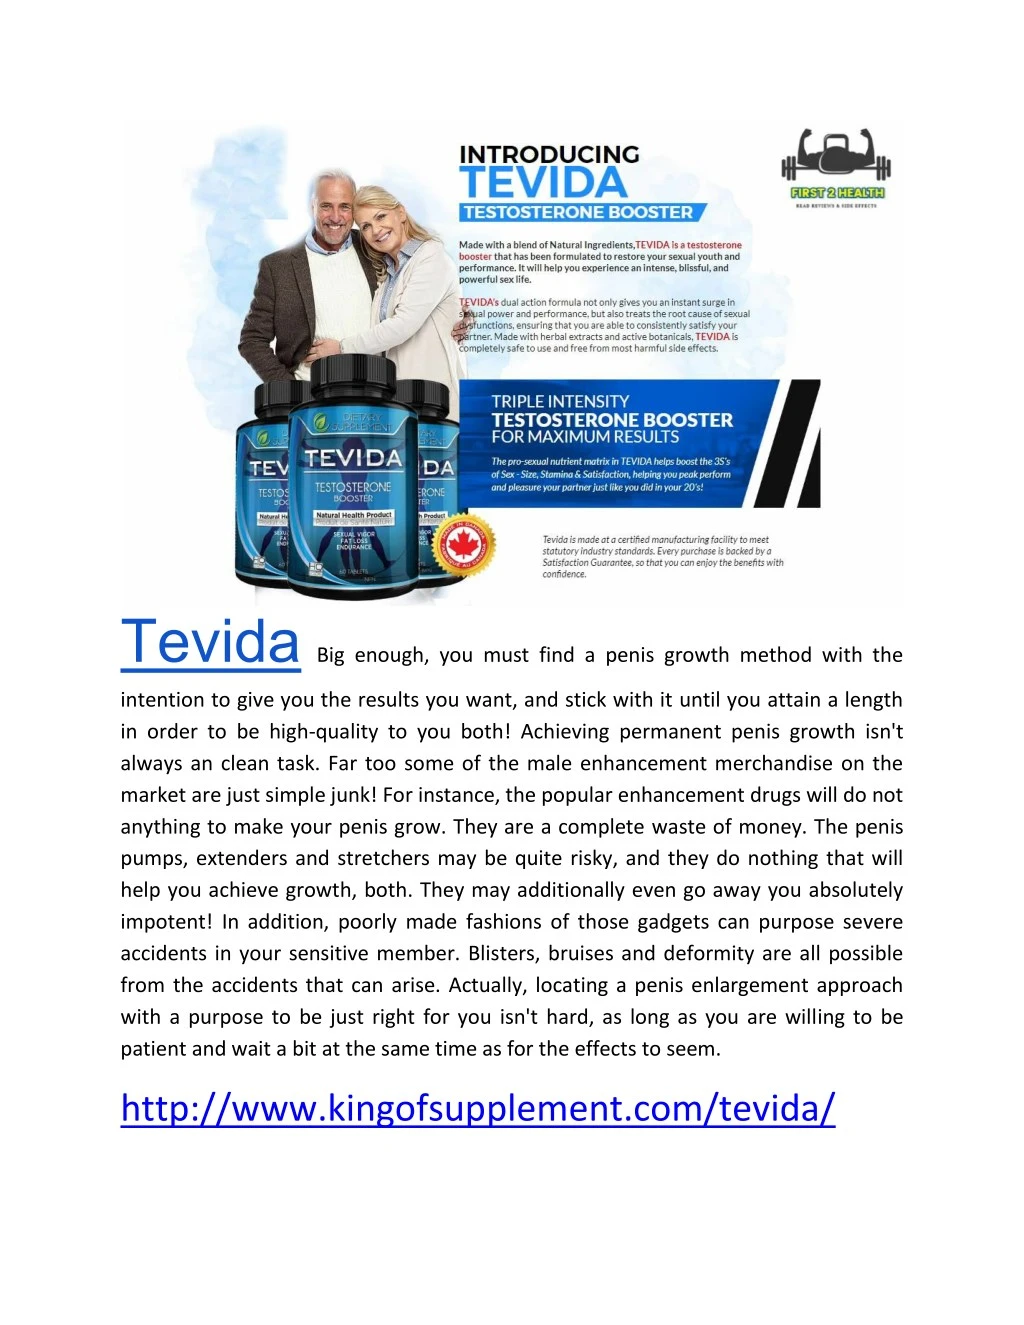 tevida big enough you must find a penis growth